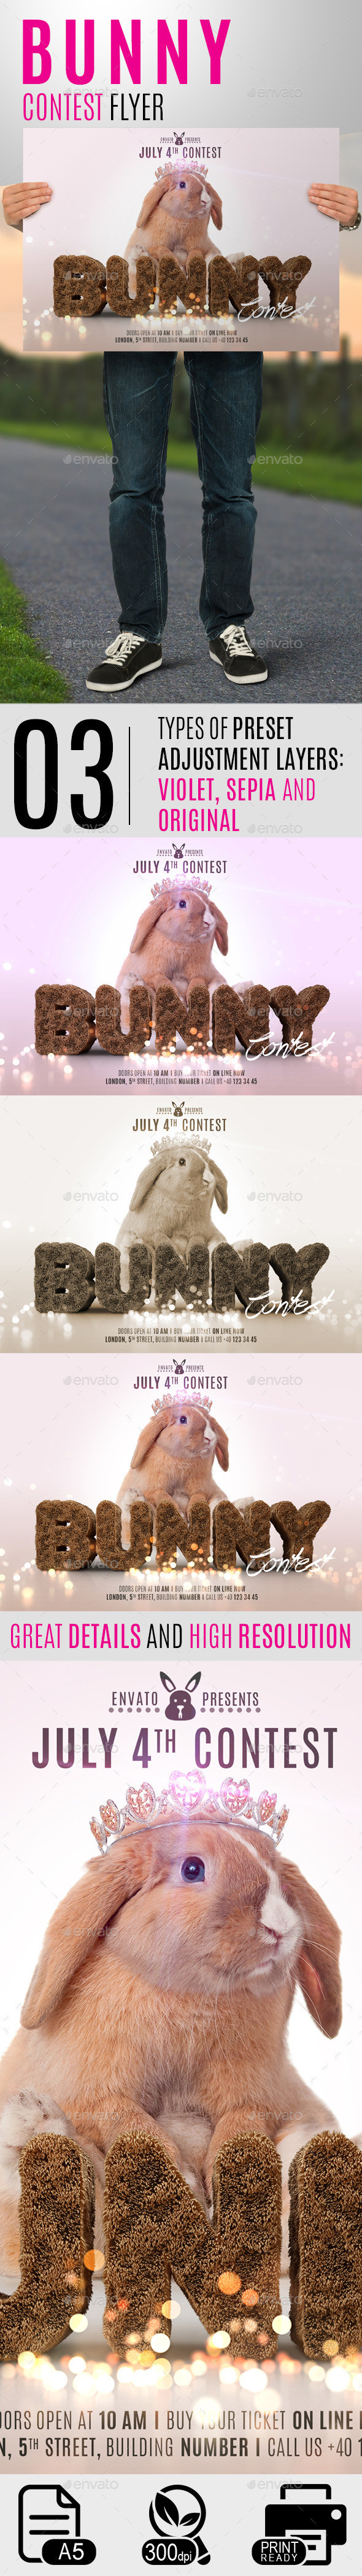 Preview 20bunny 20flyer